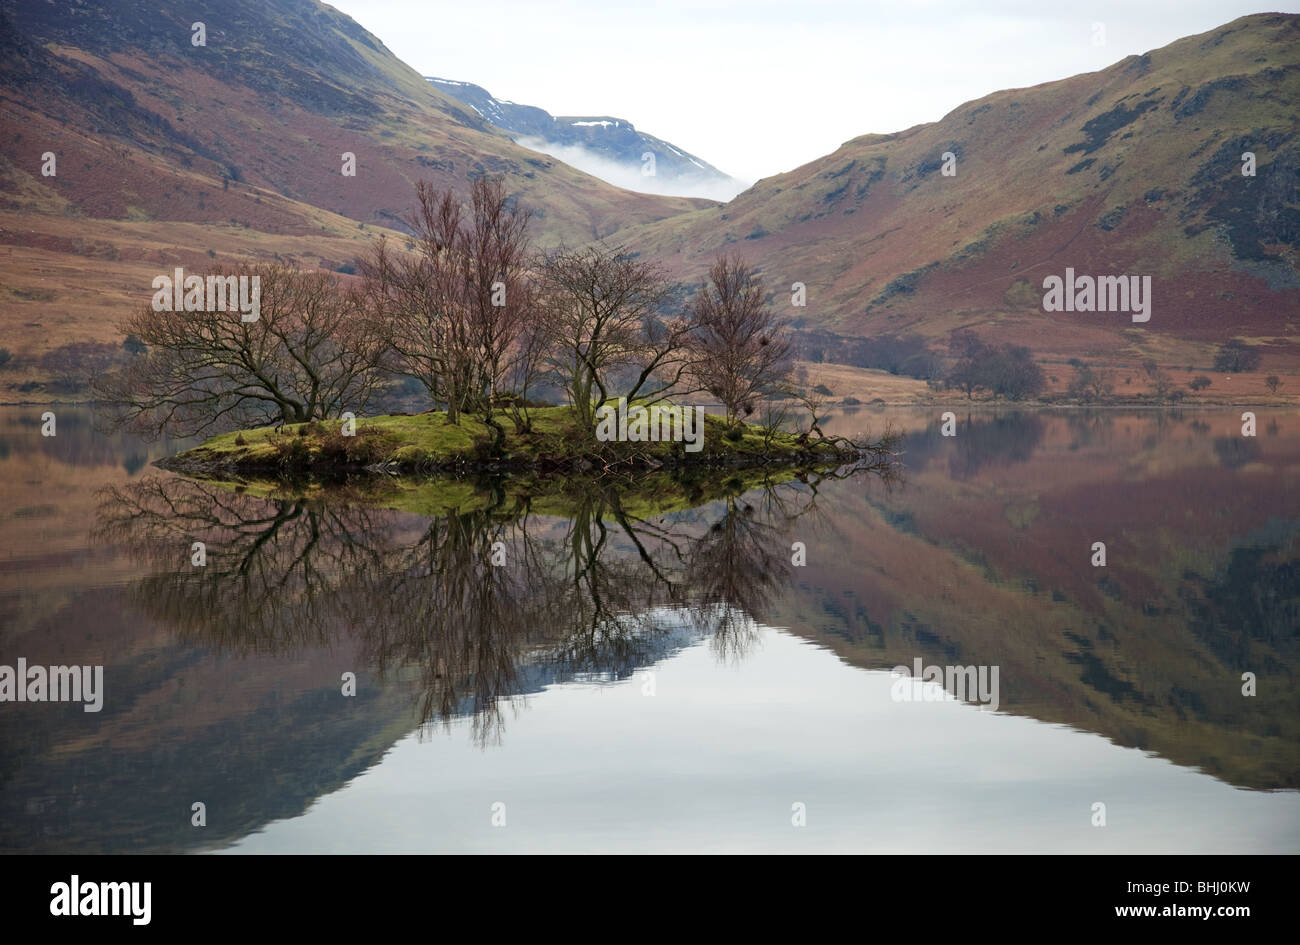 Mirrored reflections at Crummock Water, Lake district, Cumbria, England Stock Photo